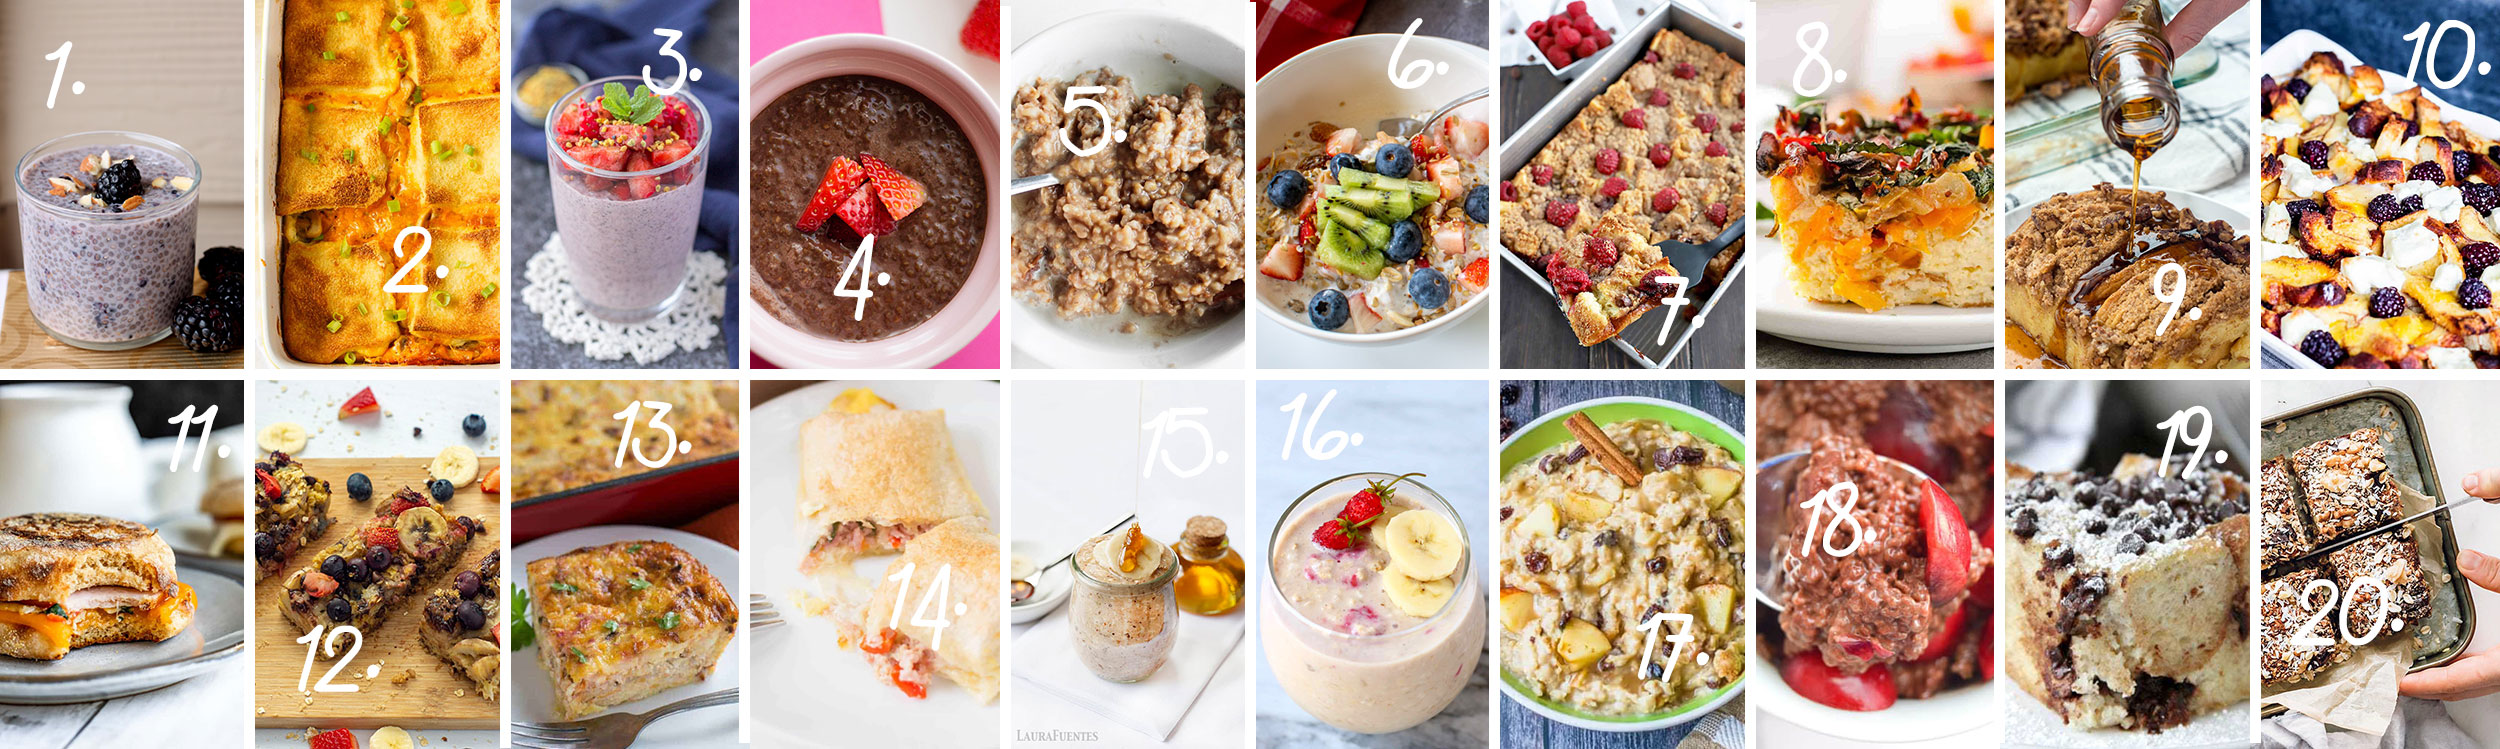 Today, we're proud to present 20 of the most delicious overnight breakfast recipes - ready for you when you wake up, to give you an easier morning! #breakfastsolutions